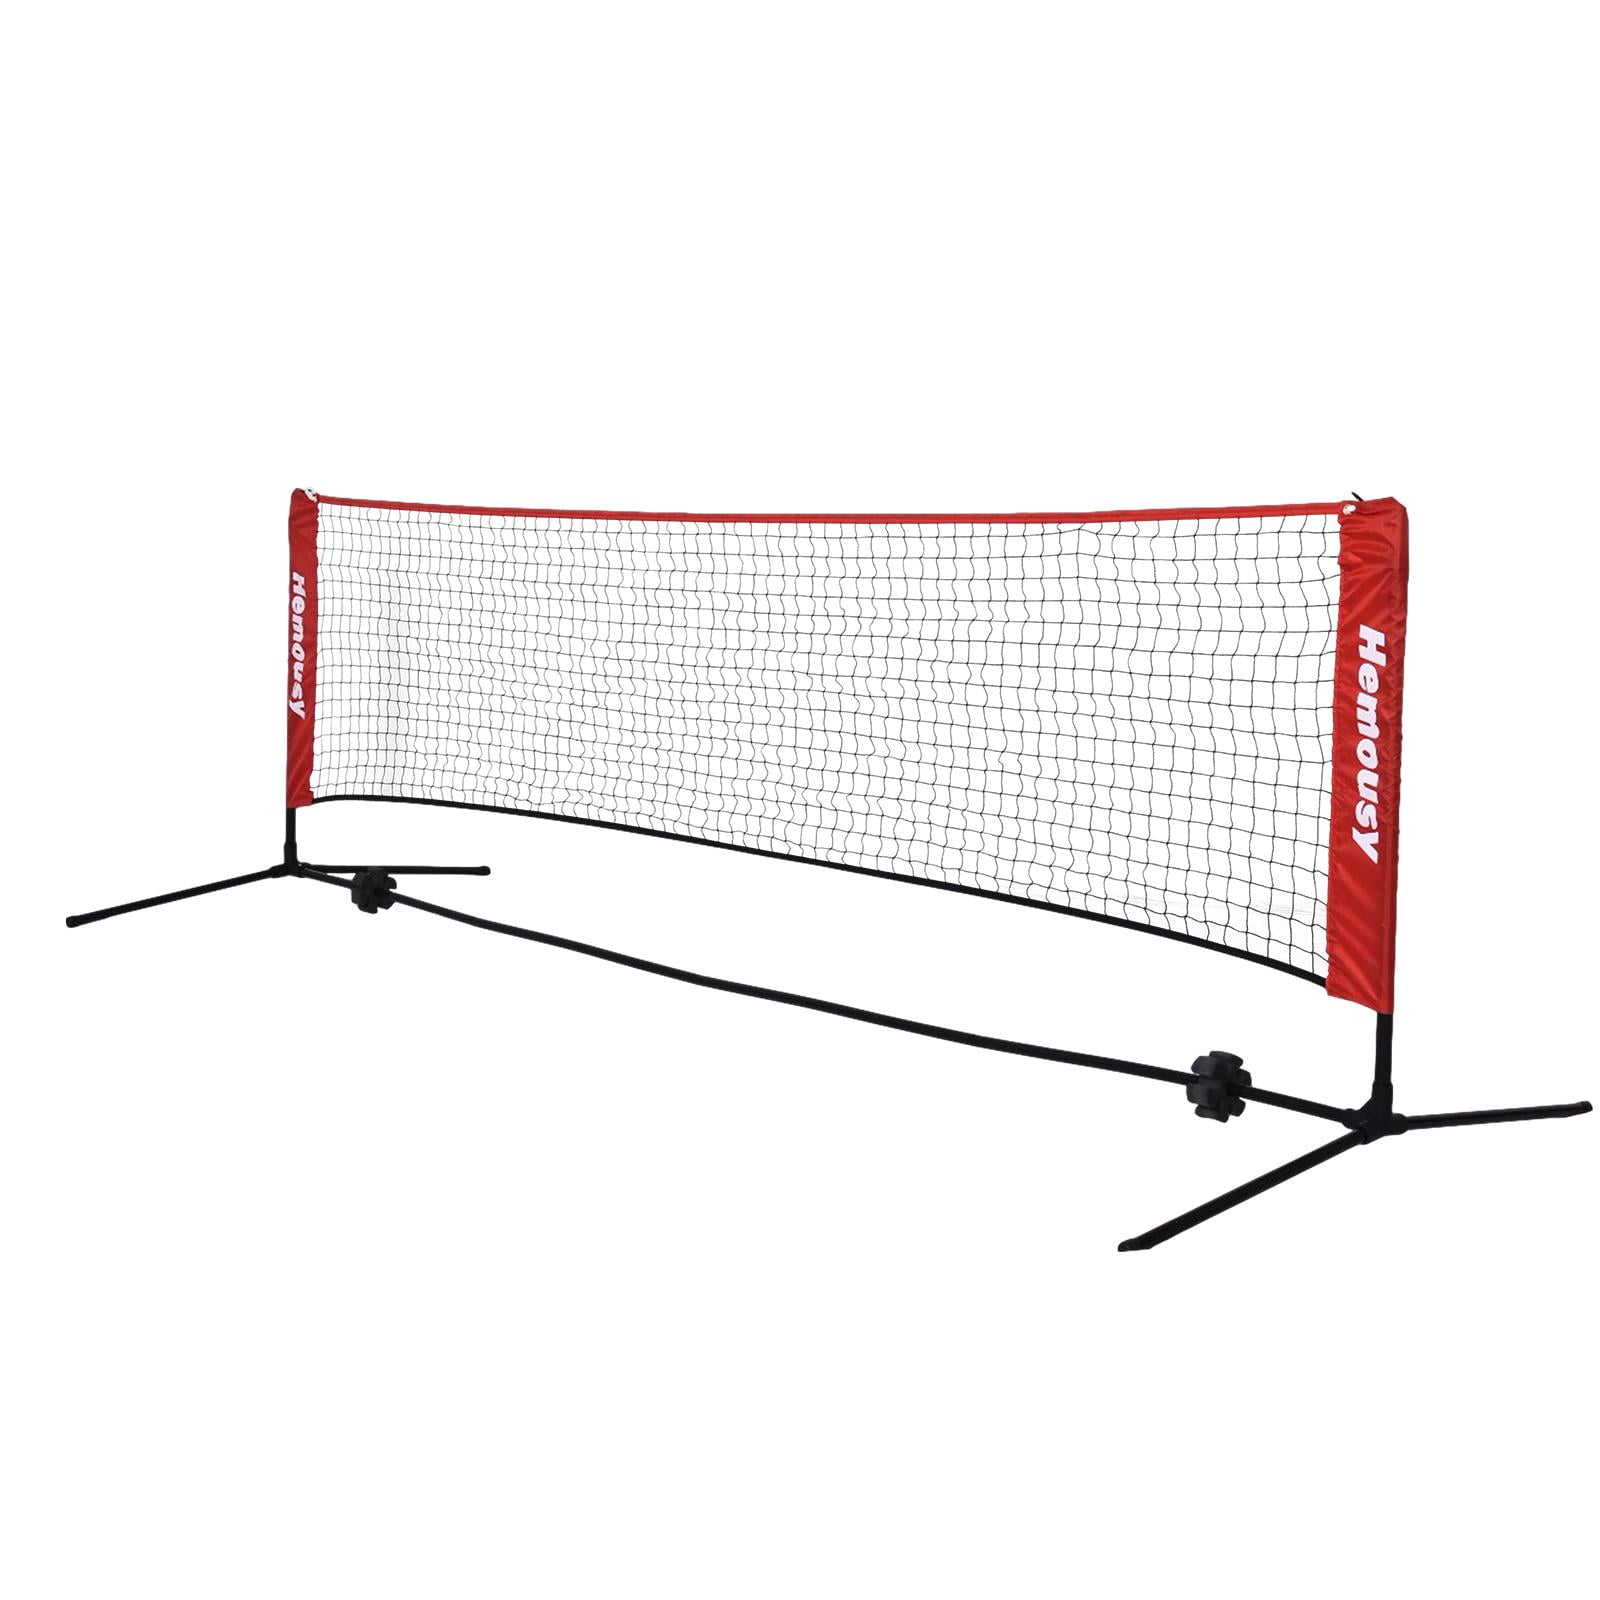 Portable Badminton Net,Easy Setup-Net for Tennis Kids Volleyball-Sports Net Without Poles Soccer Tennis Pickleball 